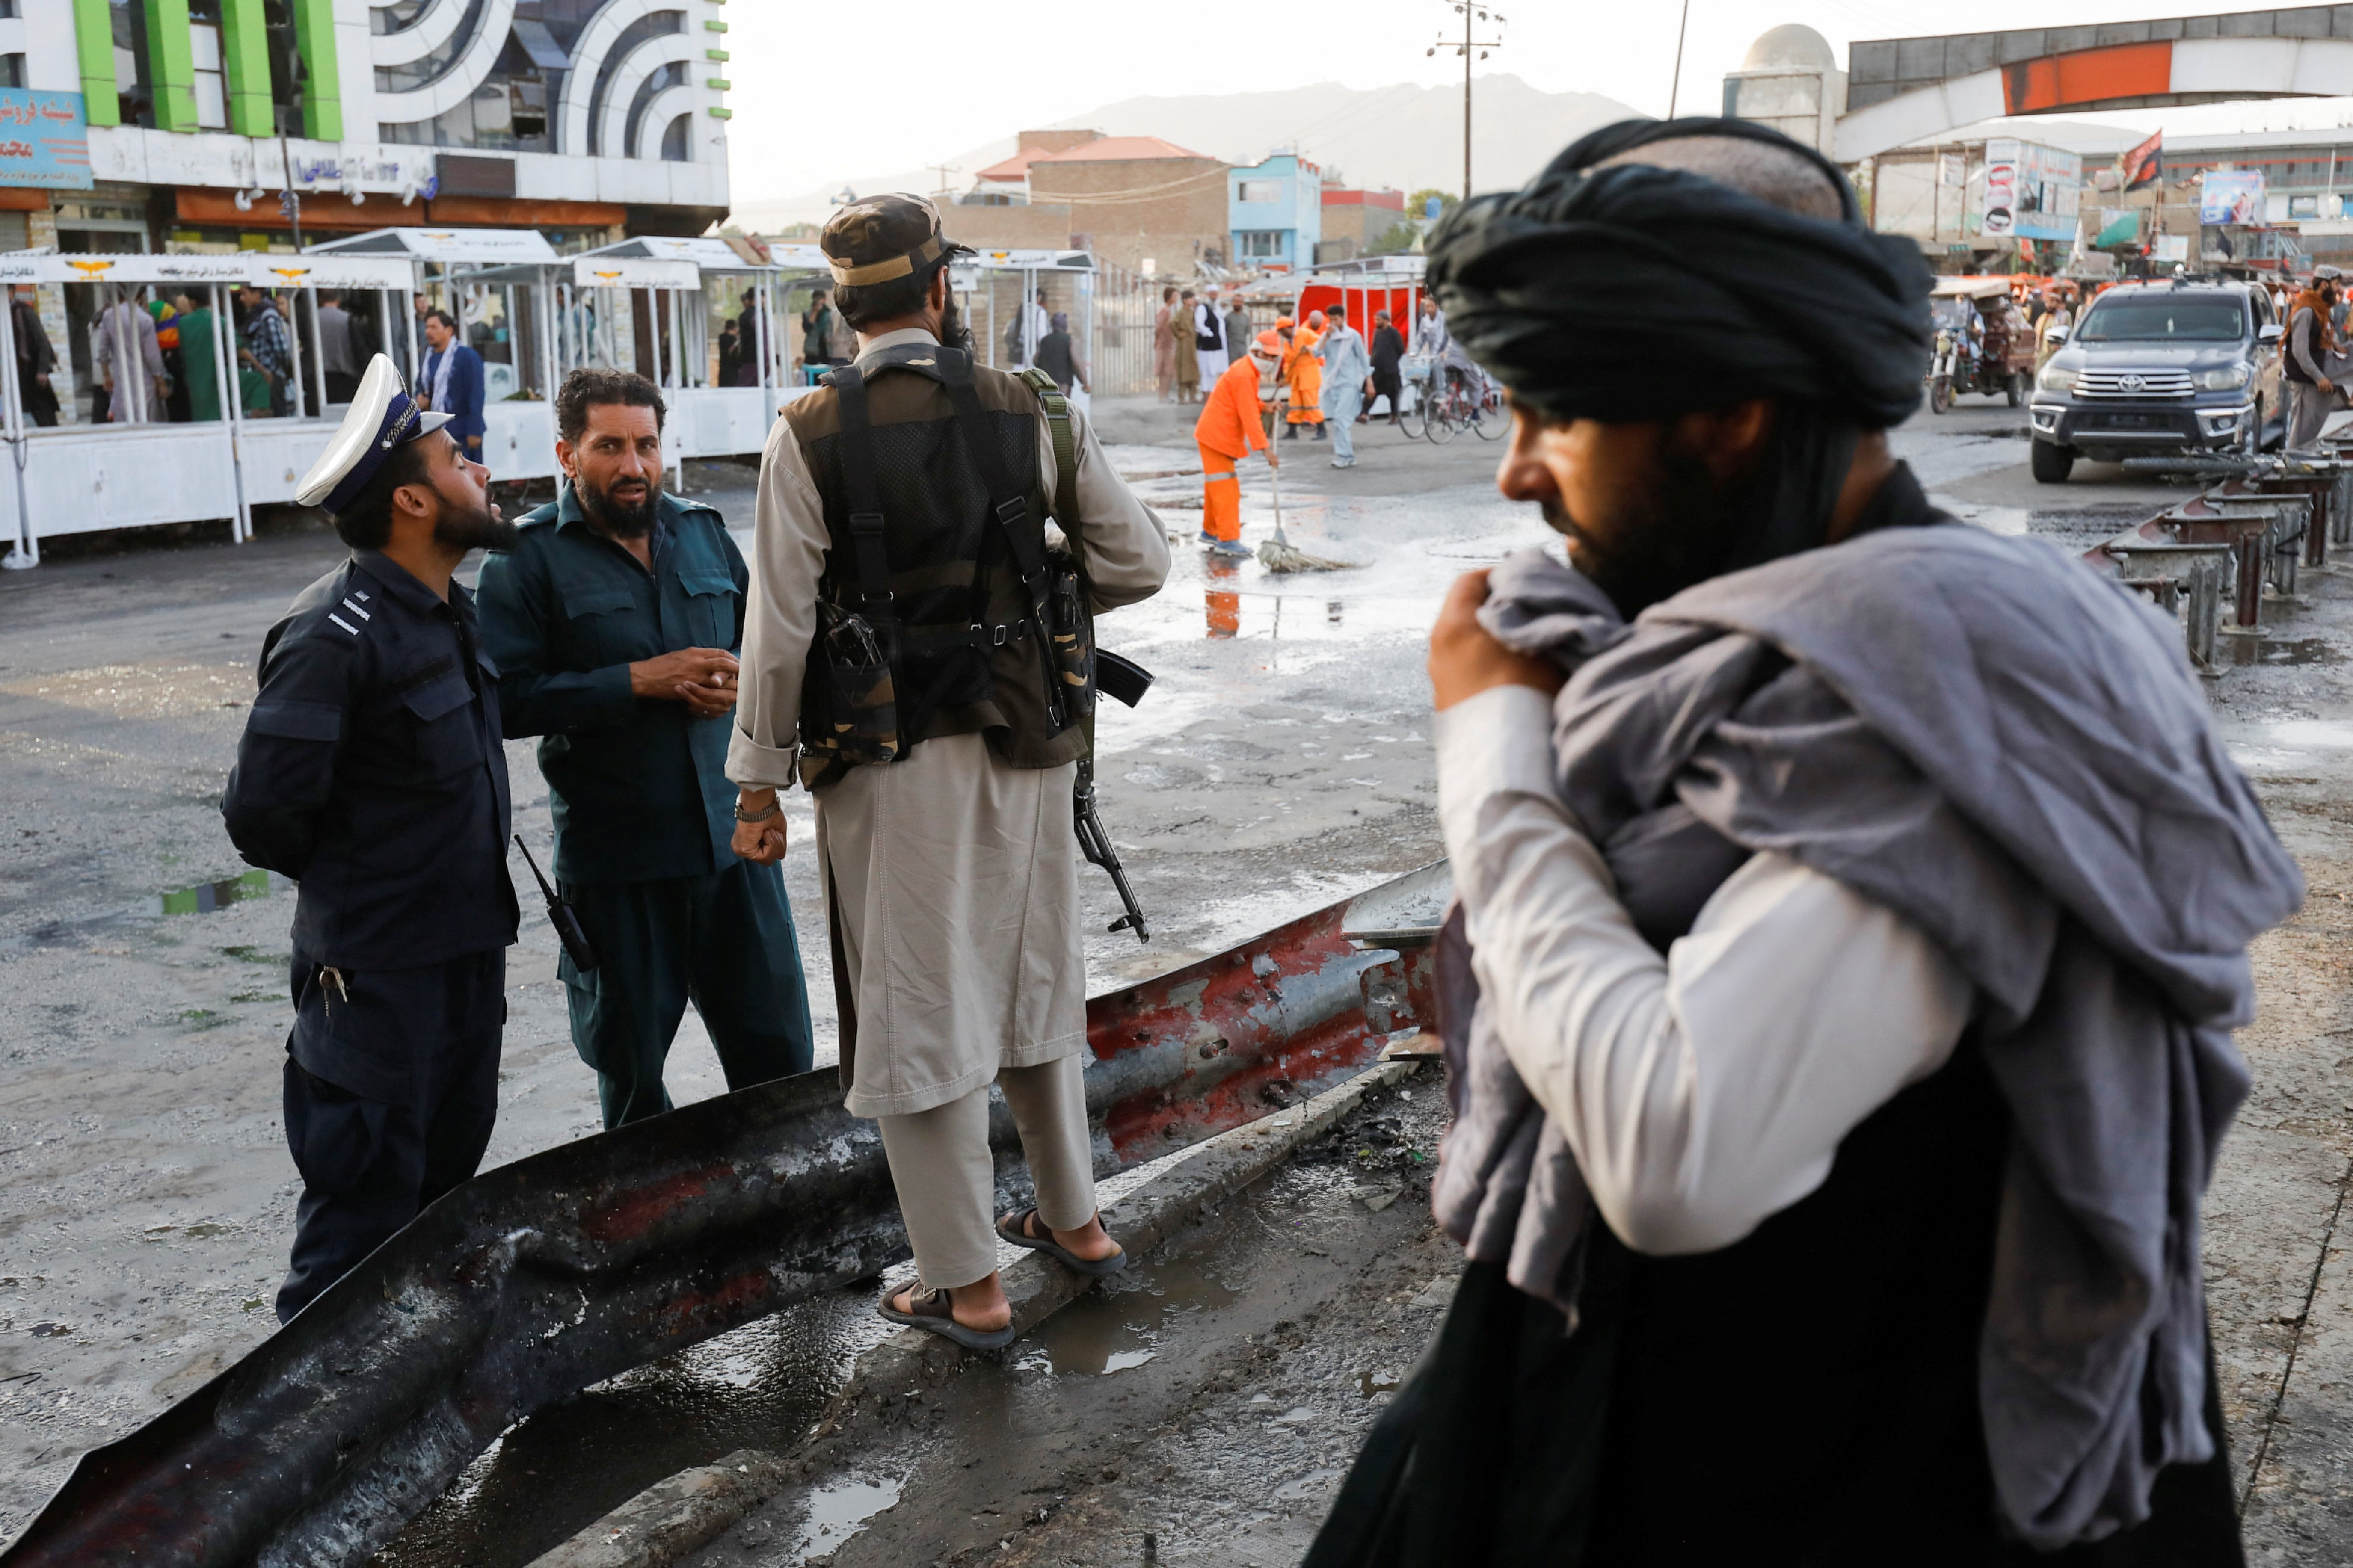 Taliban fighters stand guard at the site of a blast in Kabul, Afghanistan, Aug. 6, 2022. (REUTERS PHOTO)